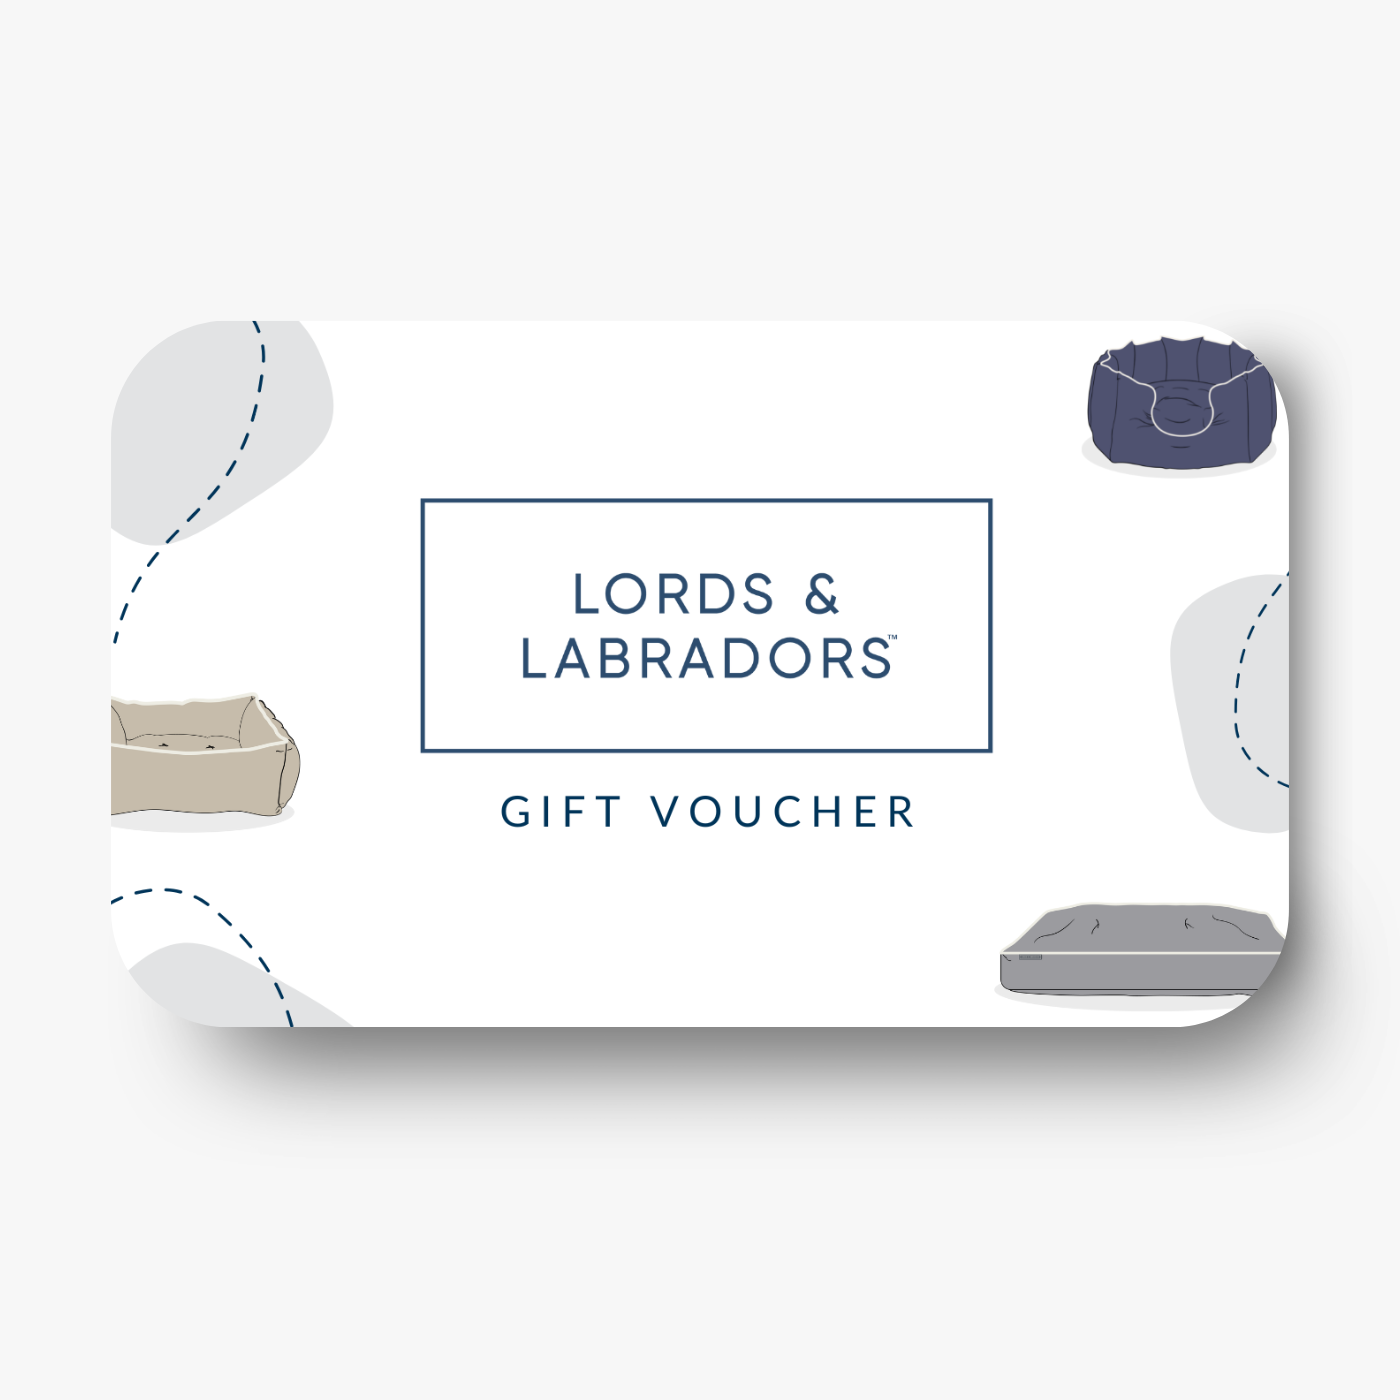 Present Your Pet Lover With The Perfect Gift For Any Special Occasion, With The Lords & Labradors Gift Voucher! Choose Your Amount And Email Straight To The Recipient!